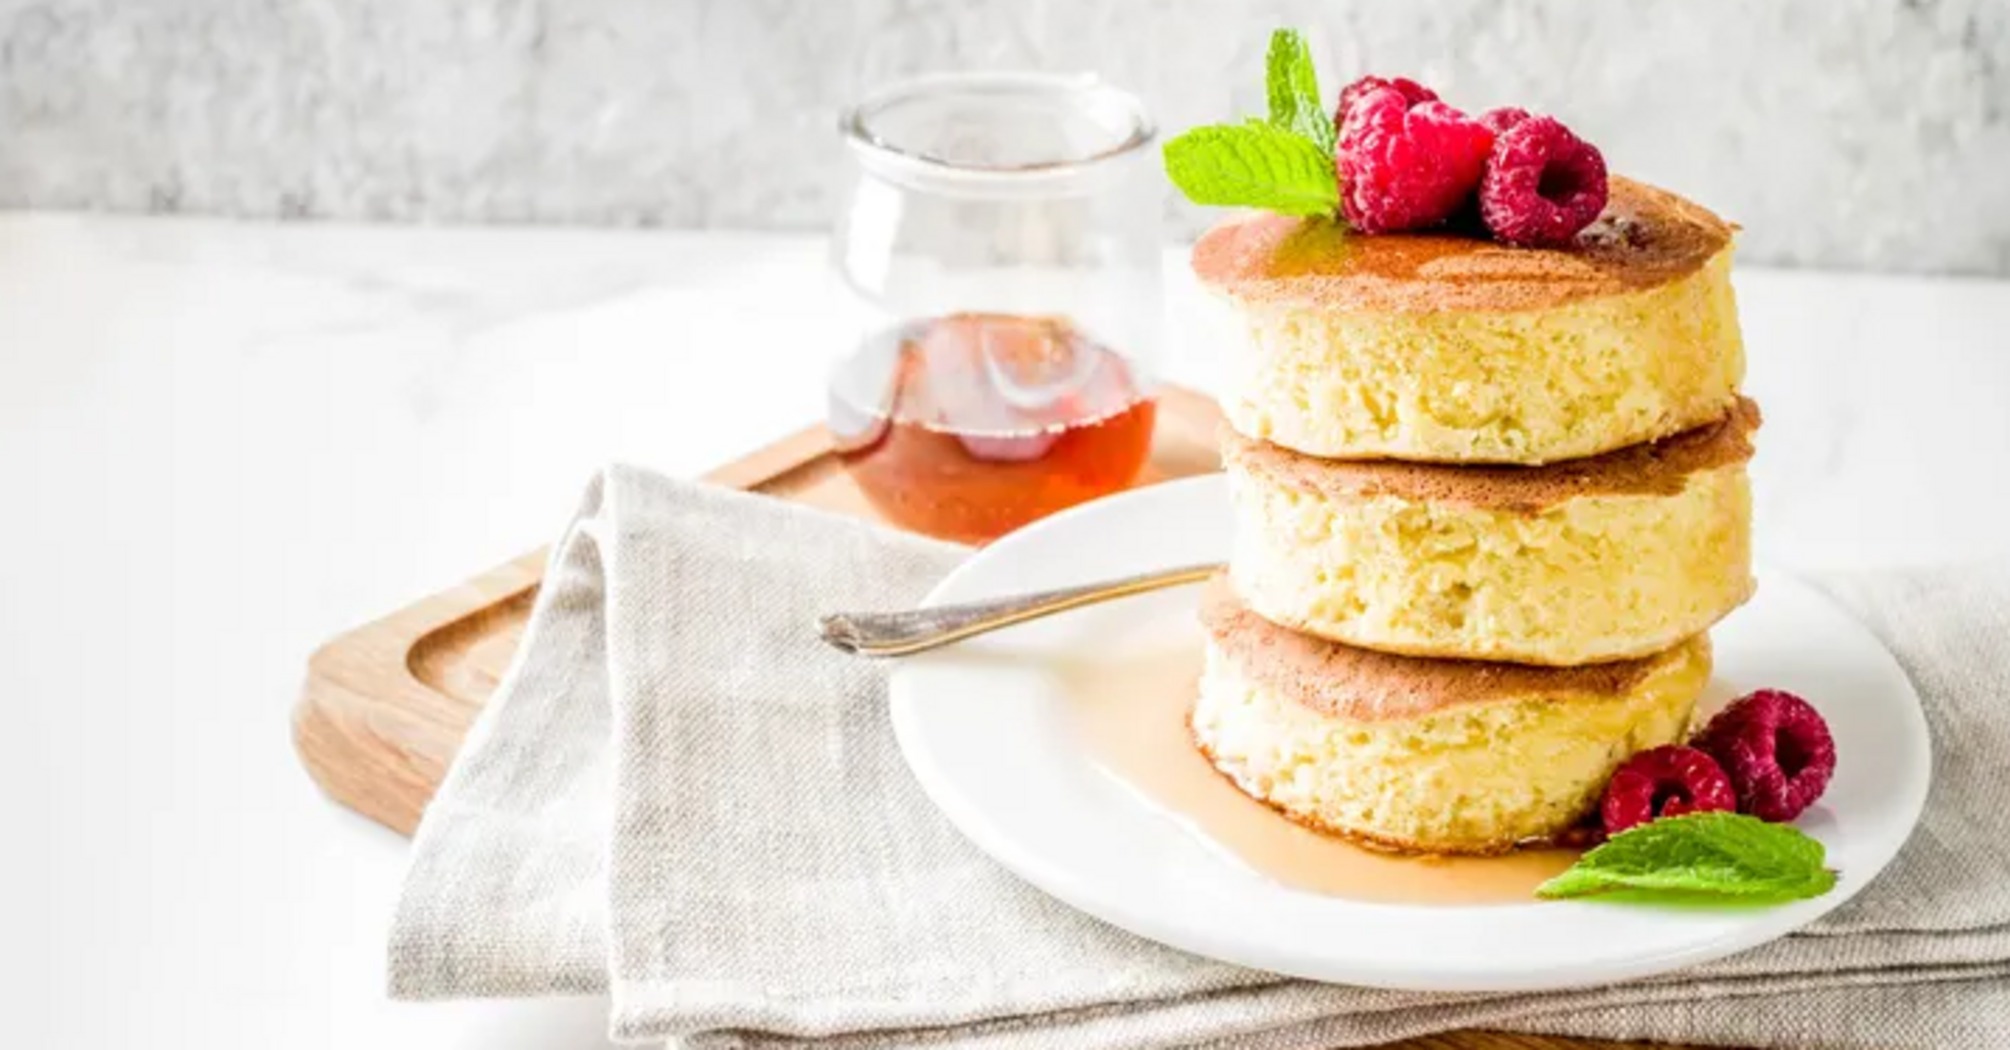 Japanese souffle pancakes are gaining worldwide attention: this is how they were invented